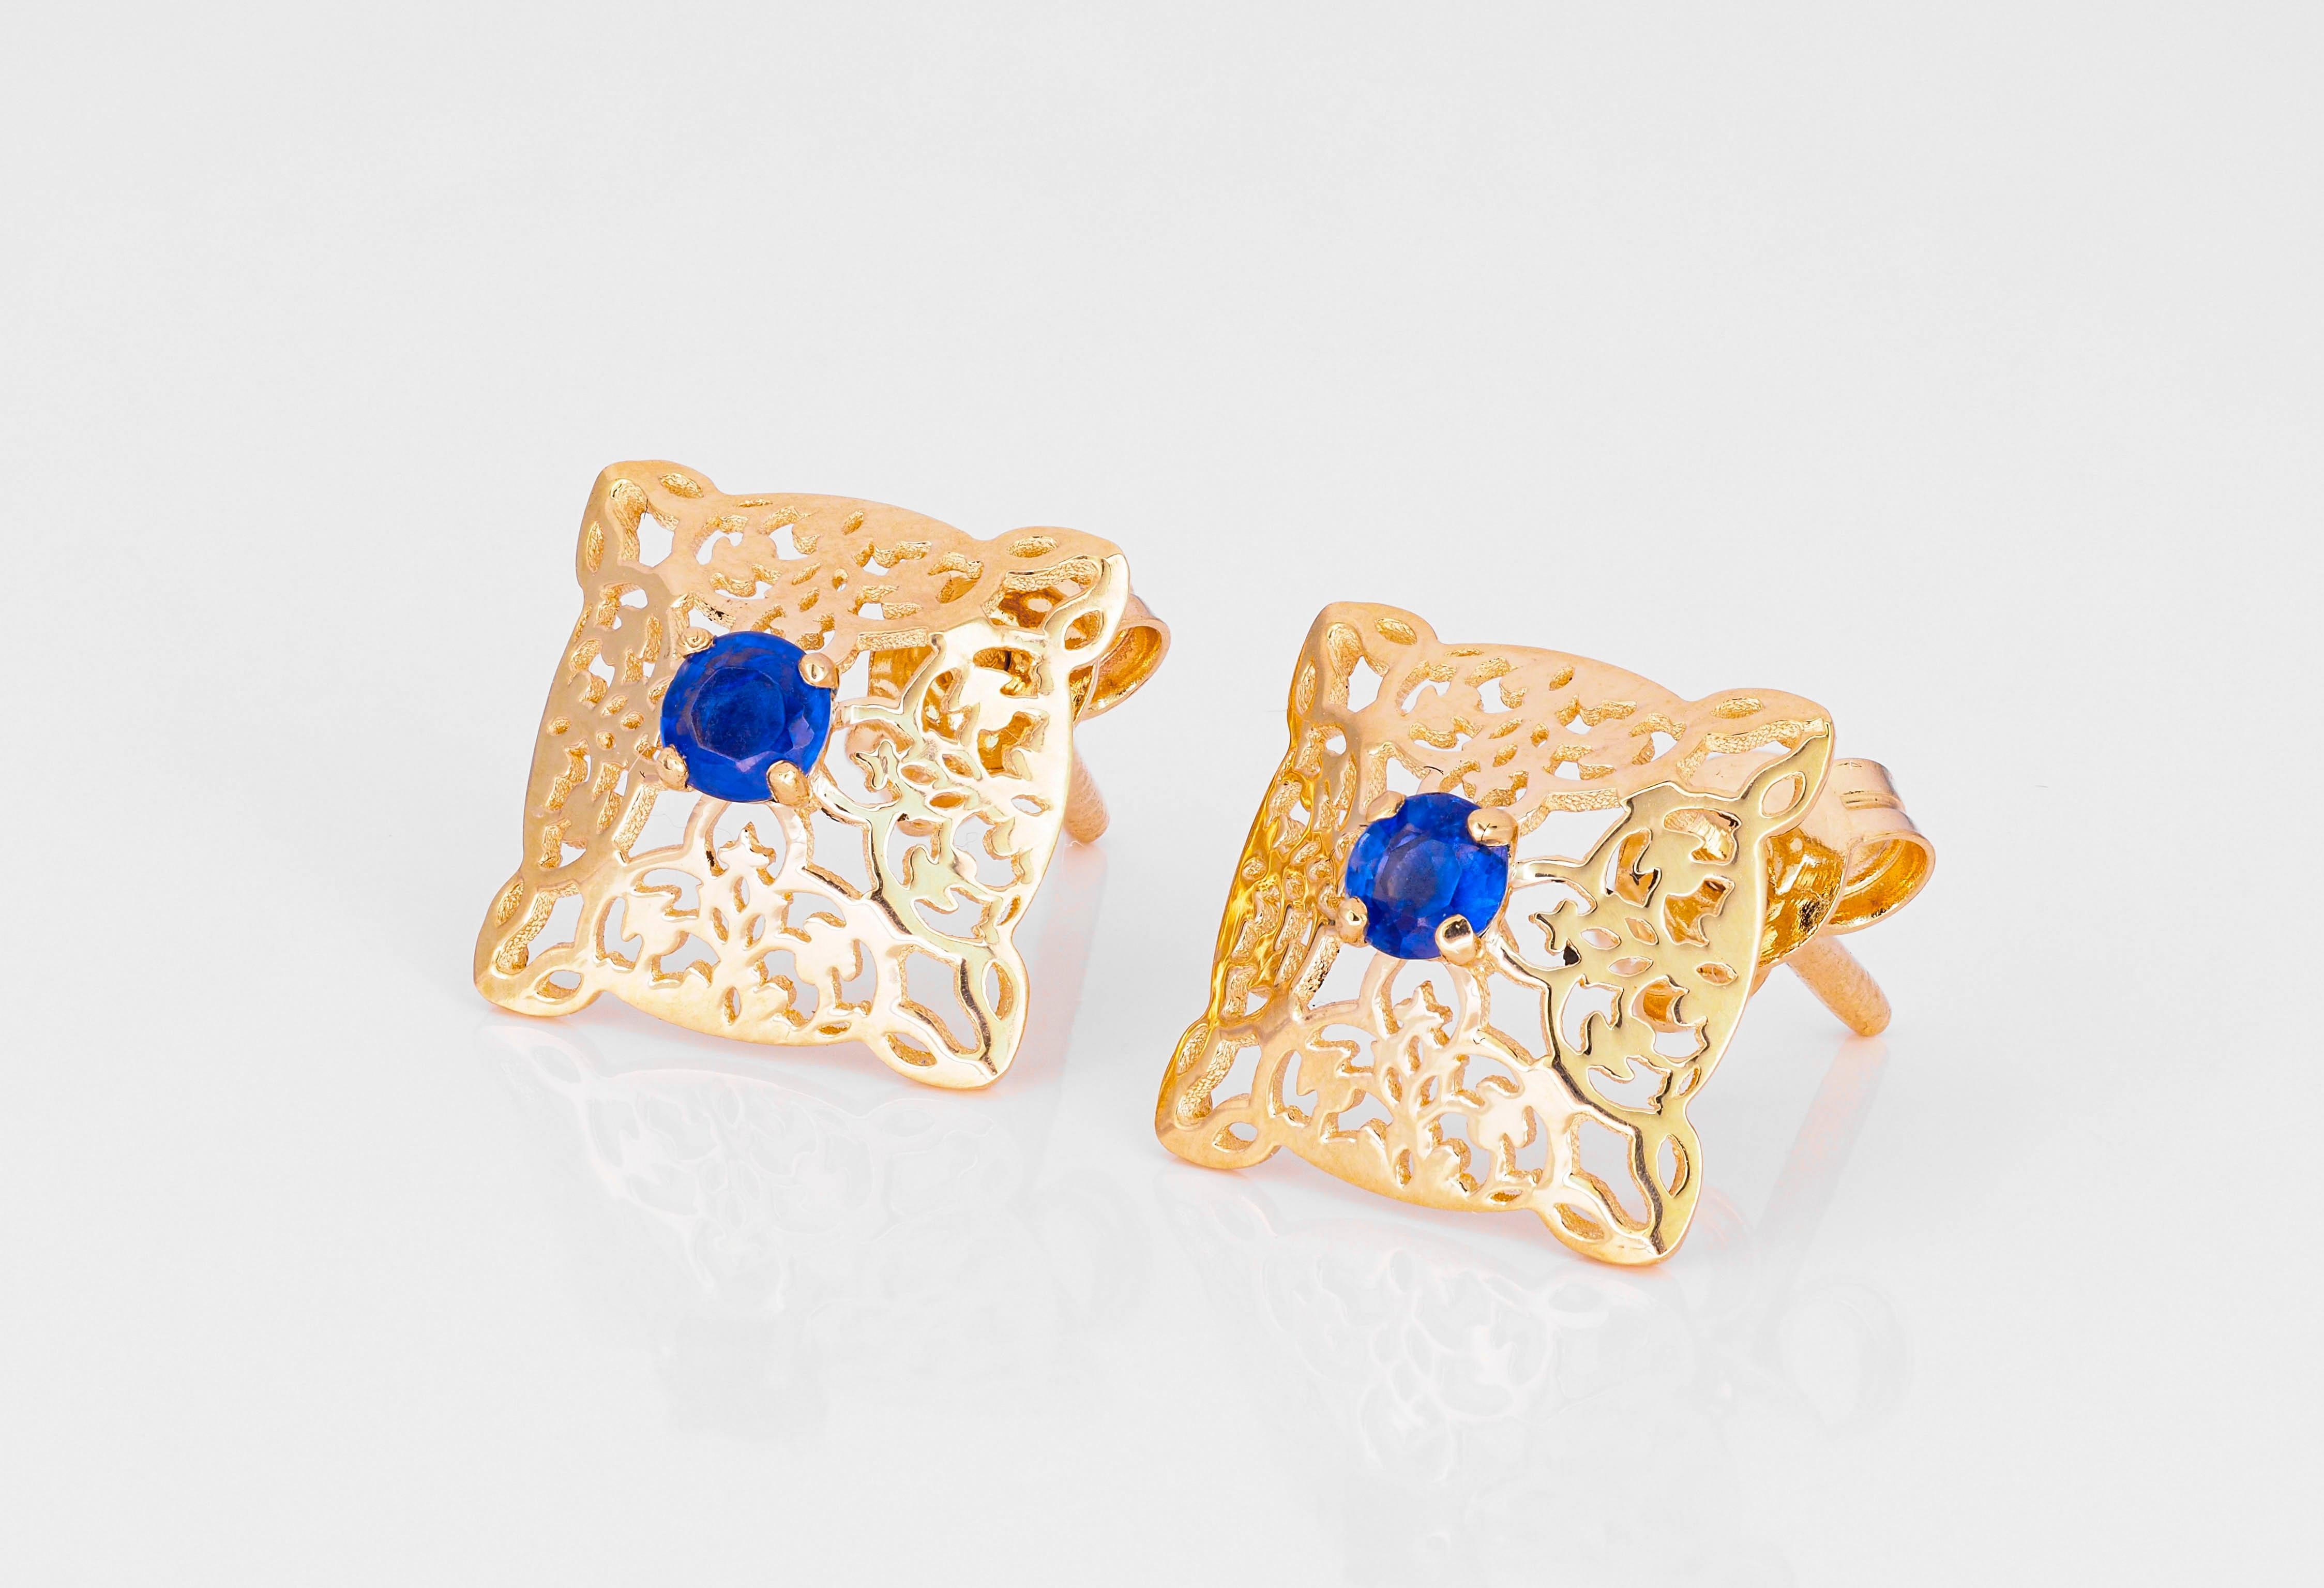 14 kt solid gold earrings with oriental pattern set with central natural sapphires. September birthstone.
Weight: 2.0 g.
Size: 16 x 11.5 mm.

Central stones: Natural sapphires 
Weight: approx 0.23 ct total (0.11 ct + 0.12 ct = 0.23 ct), 2 pieces,